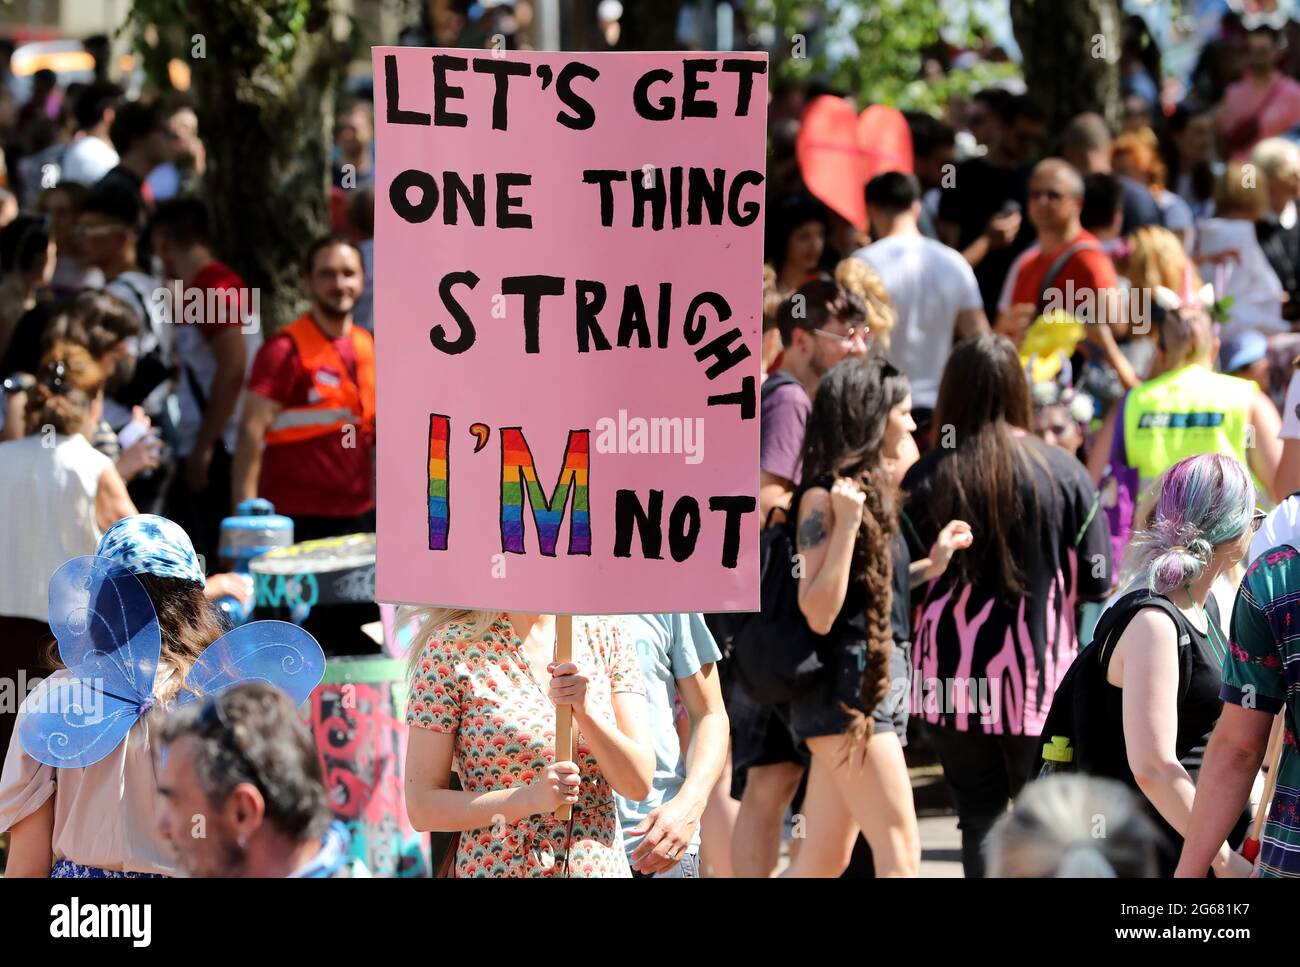 (210703) -- ZAGREB, July 3, 2021 (Xinhua) -- Members and supporters of the LGBTQ community gather during the Pride Parade in Zagreb, Croatia, on July 3, 2021. (Jurica Galoic/Pixsell via Xinhua) Stock Photo